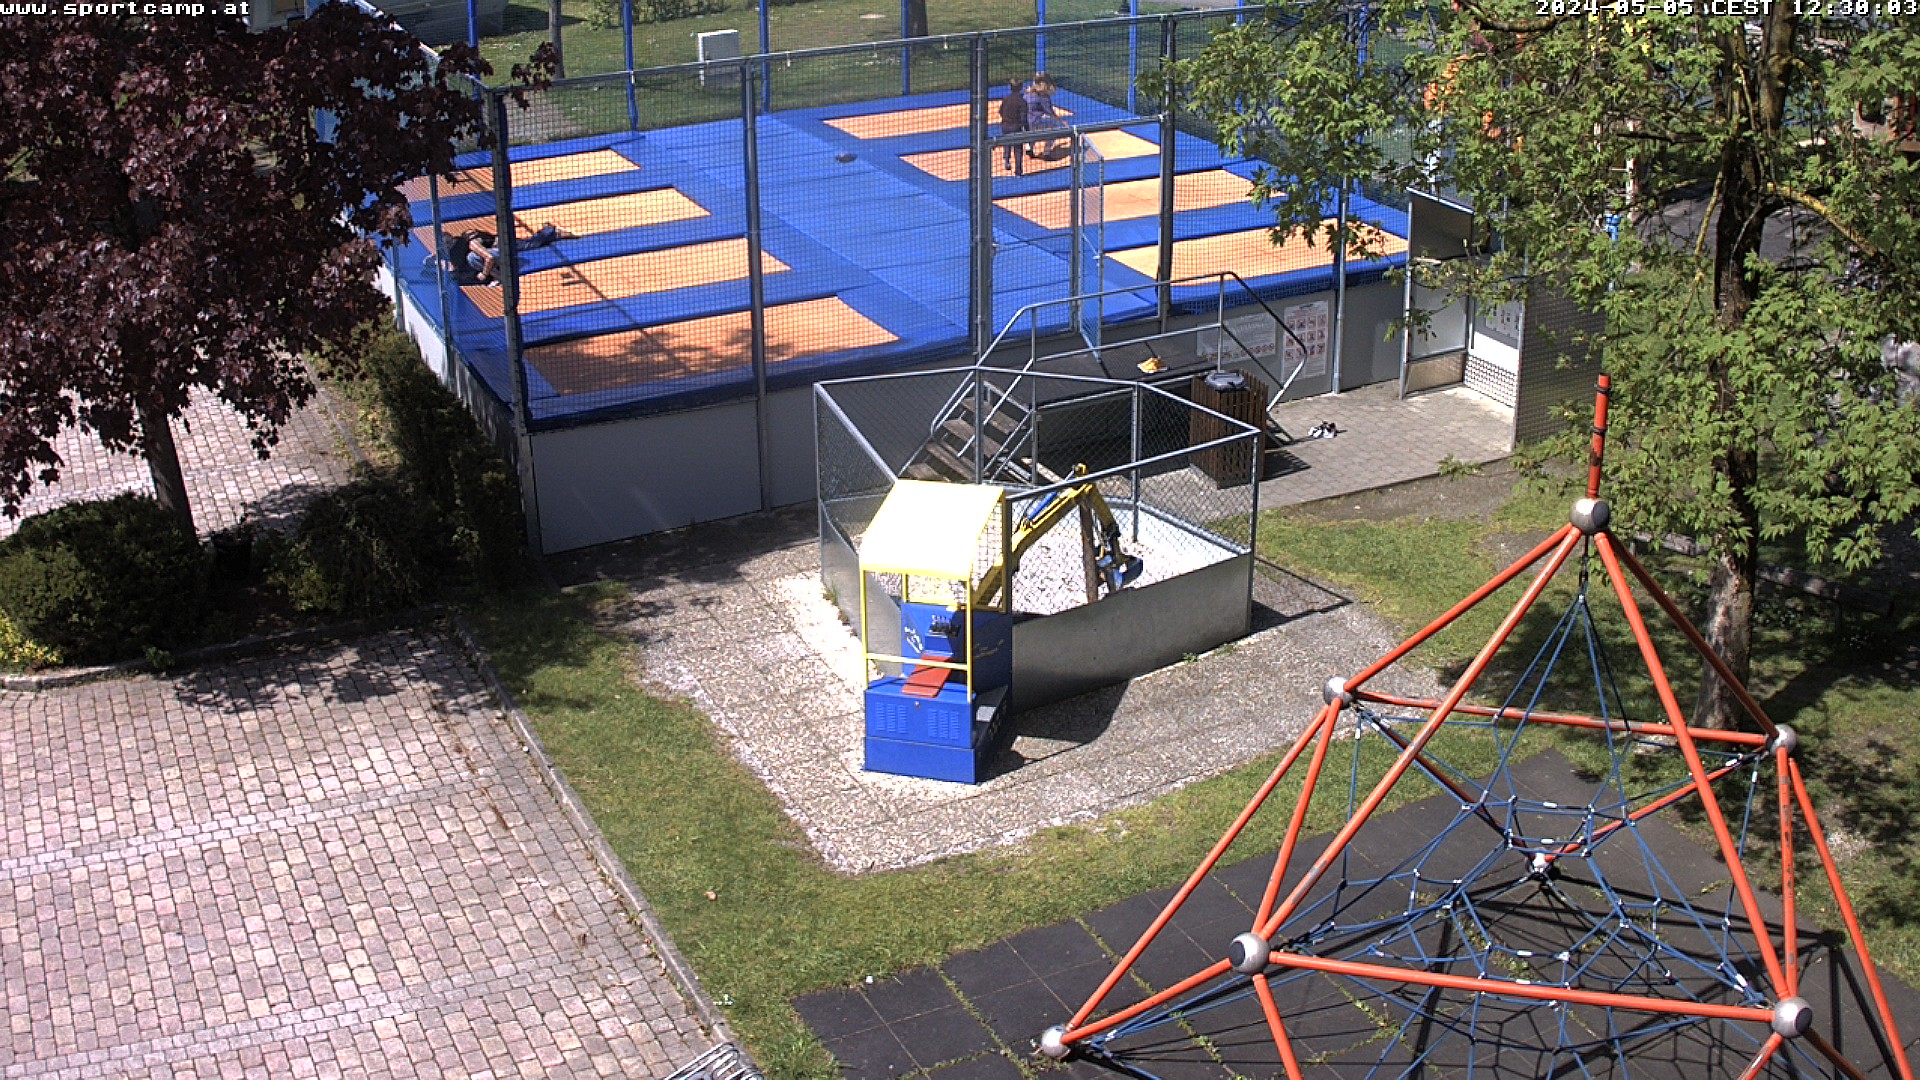 Giant trampoline and camping